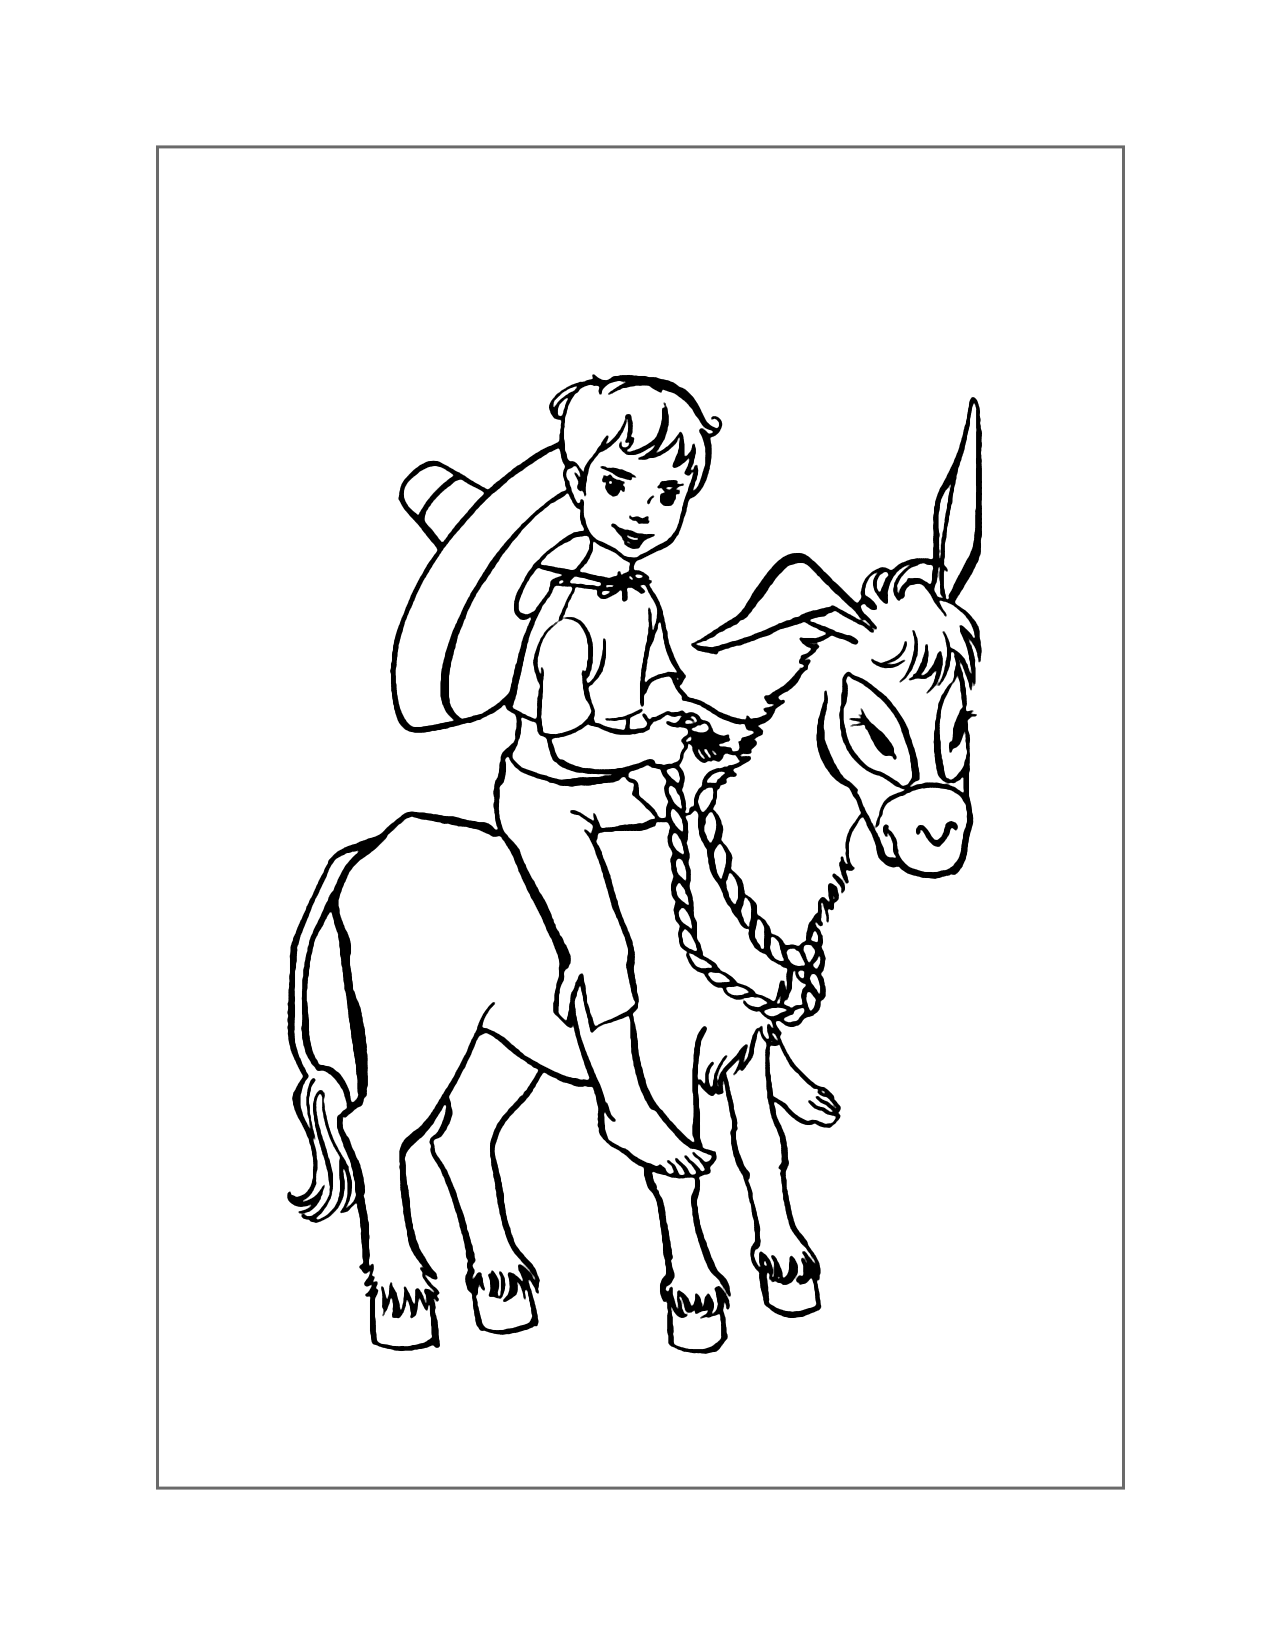 Boy Riding Donkey Coloring Page